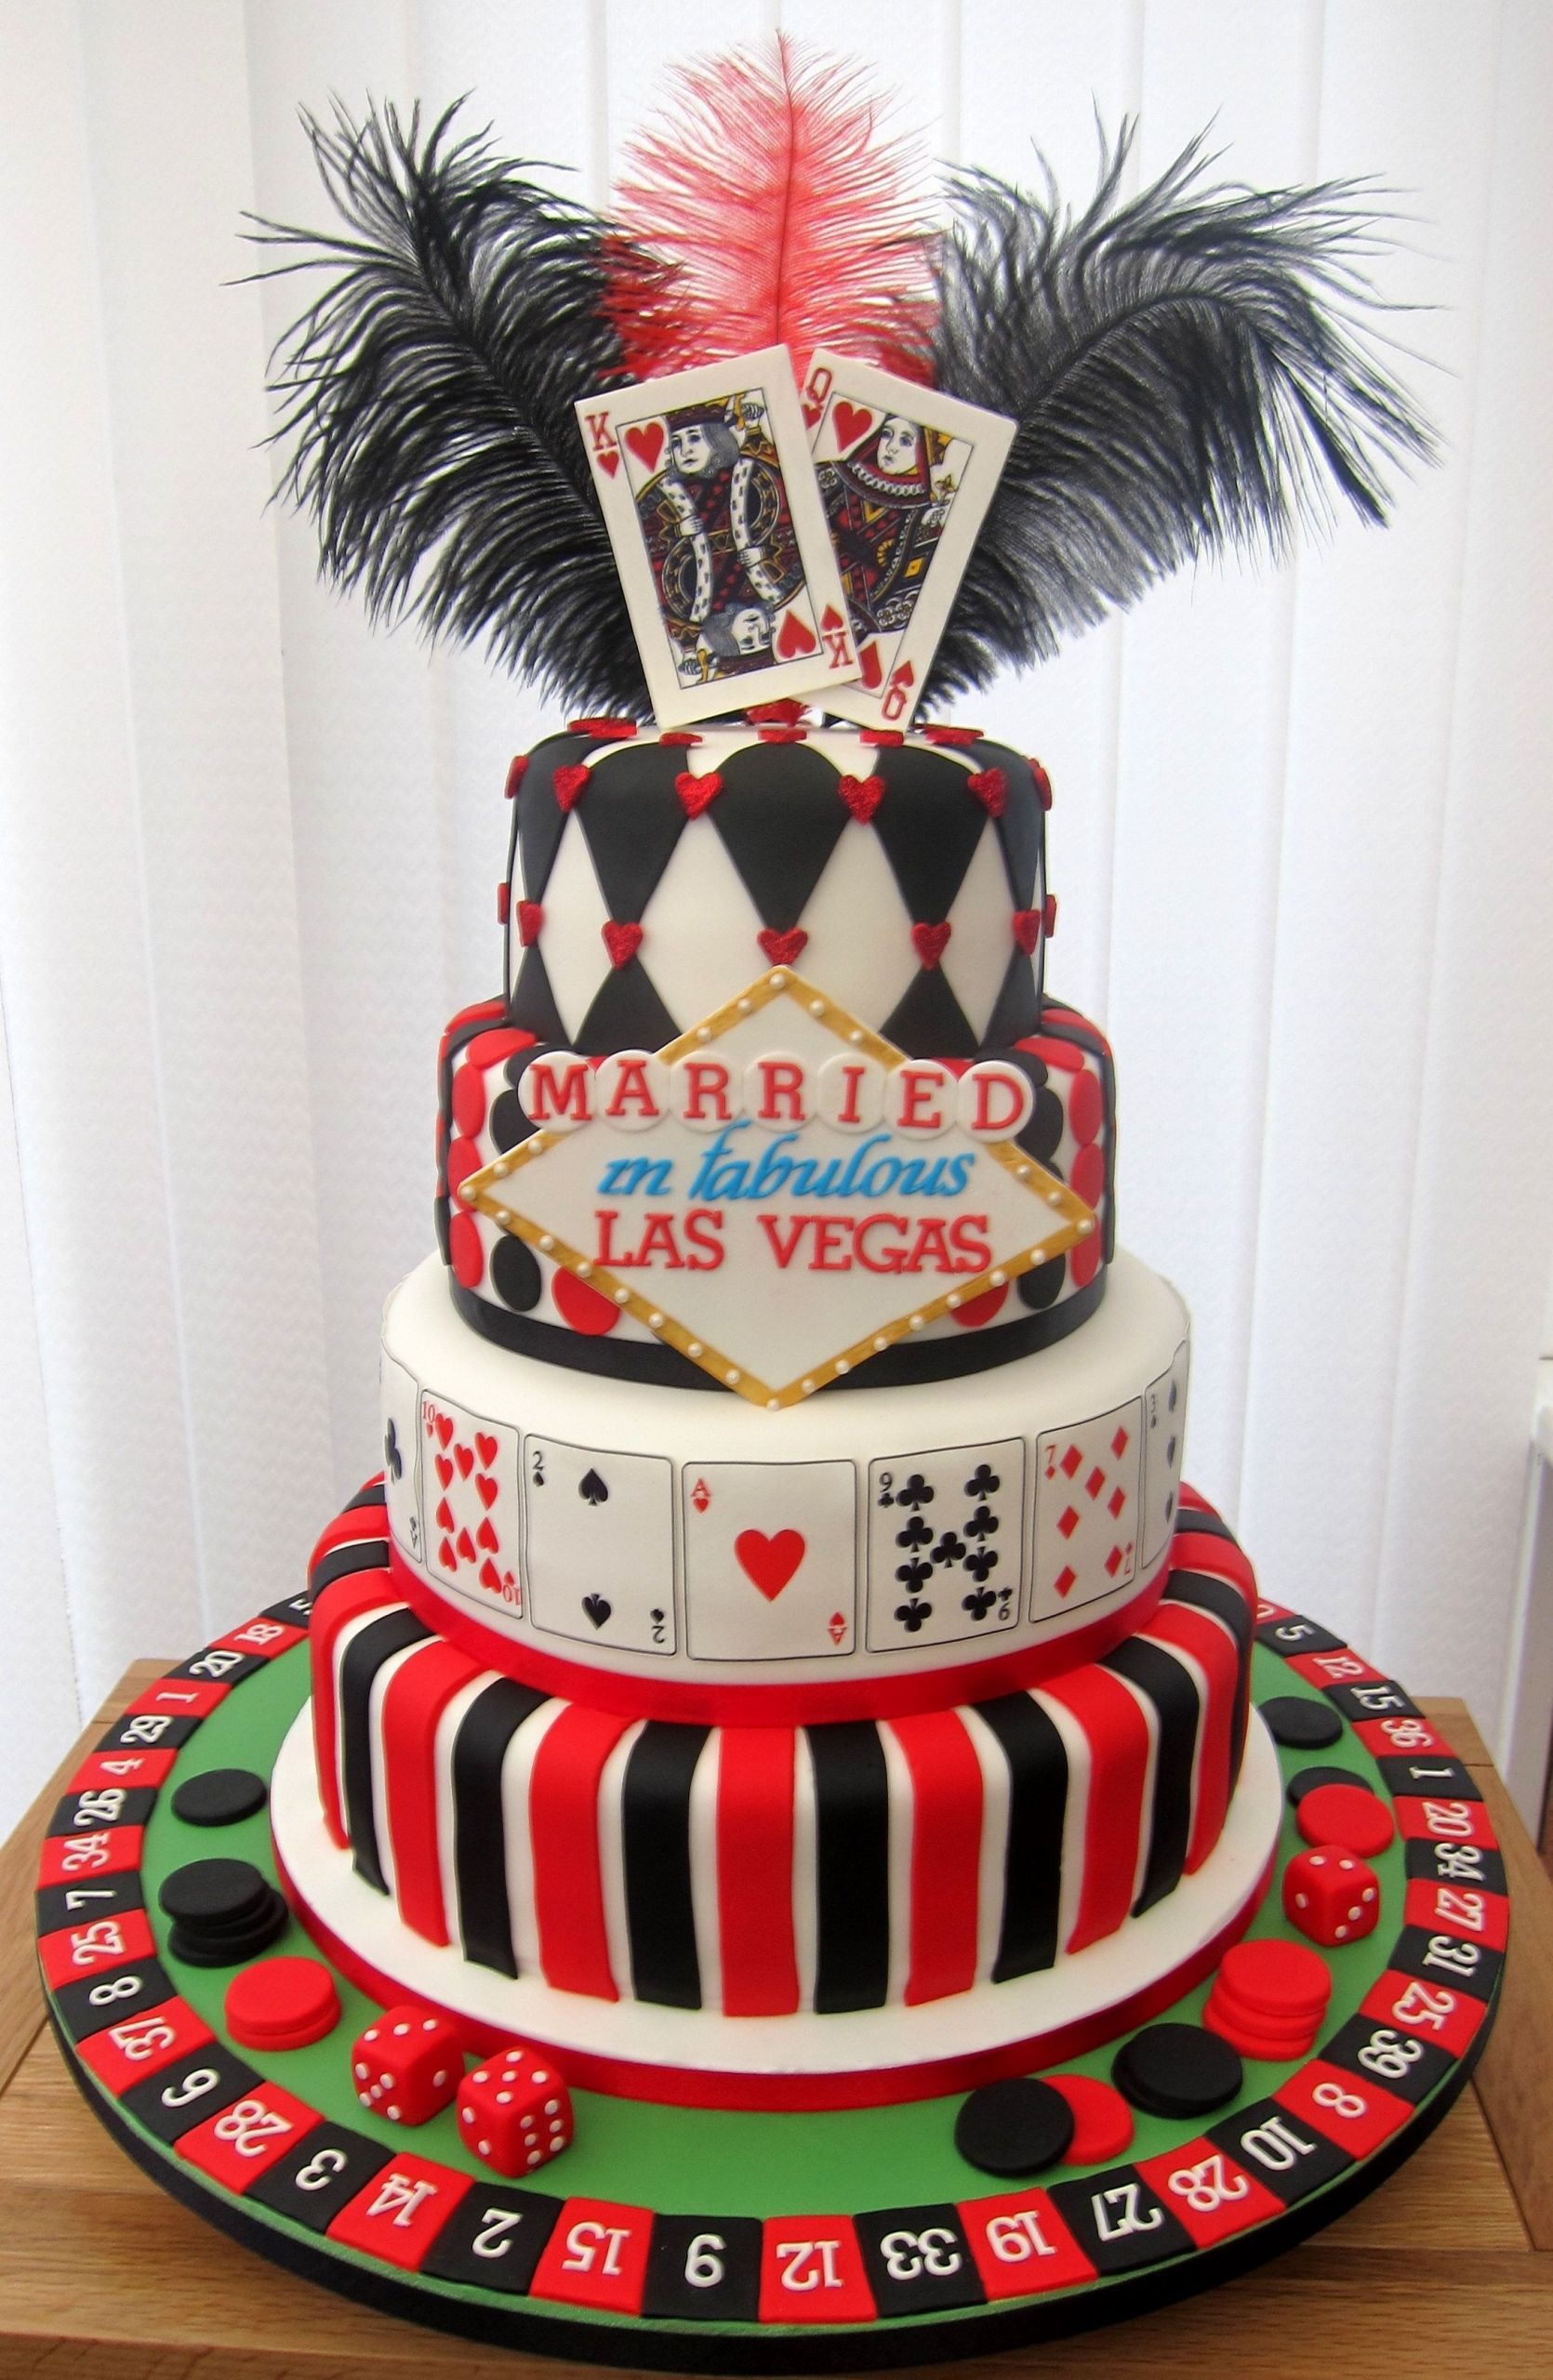 Vegas Wedding Cakes
 Wedding cake for a couple who were married in vegas and